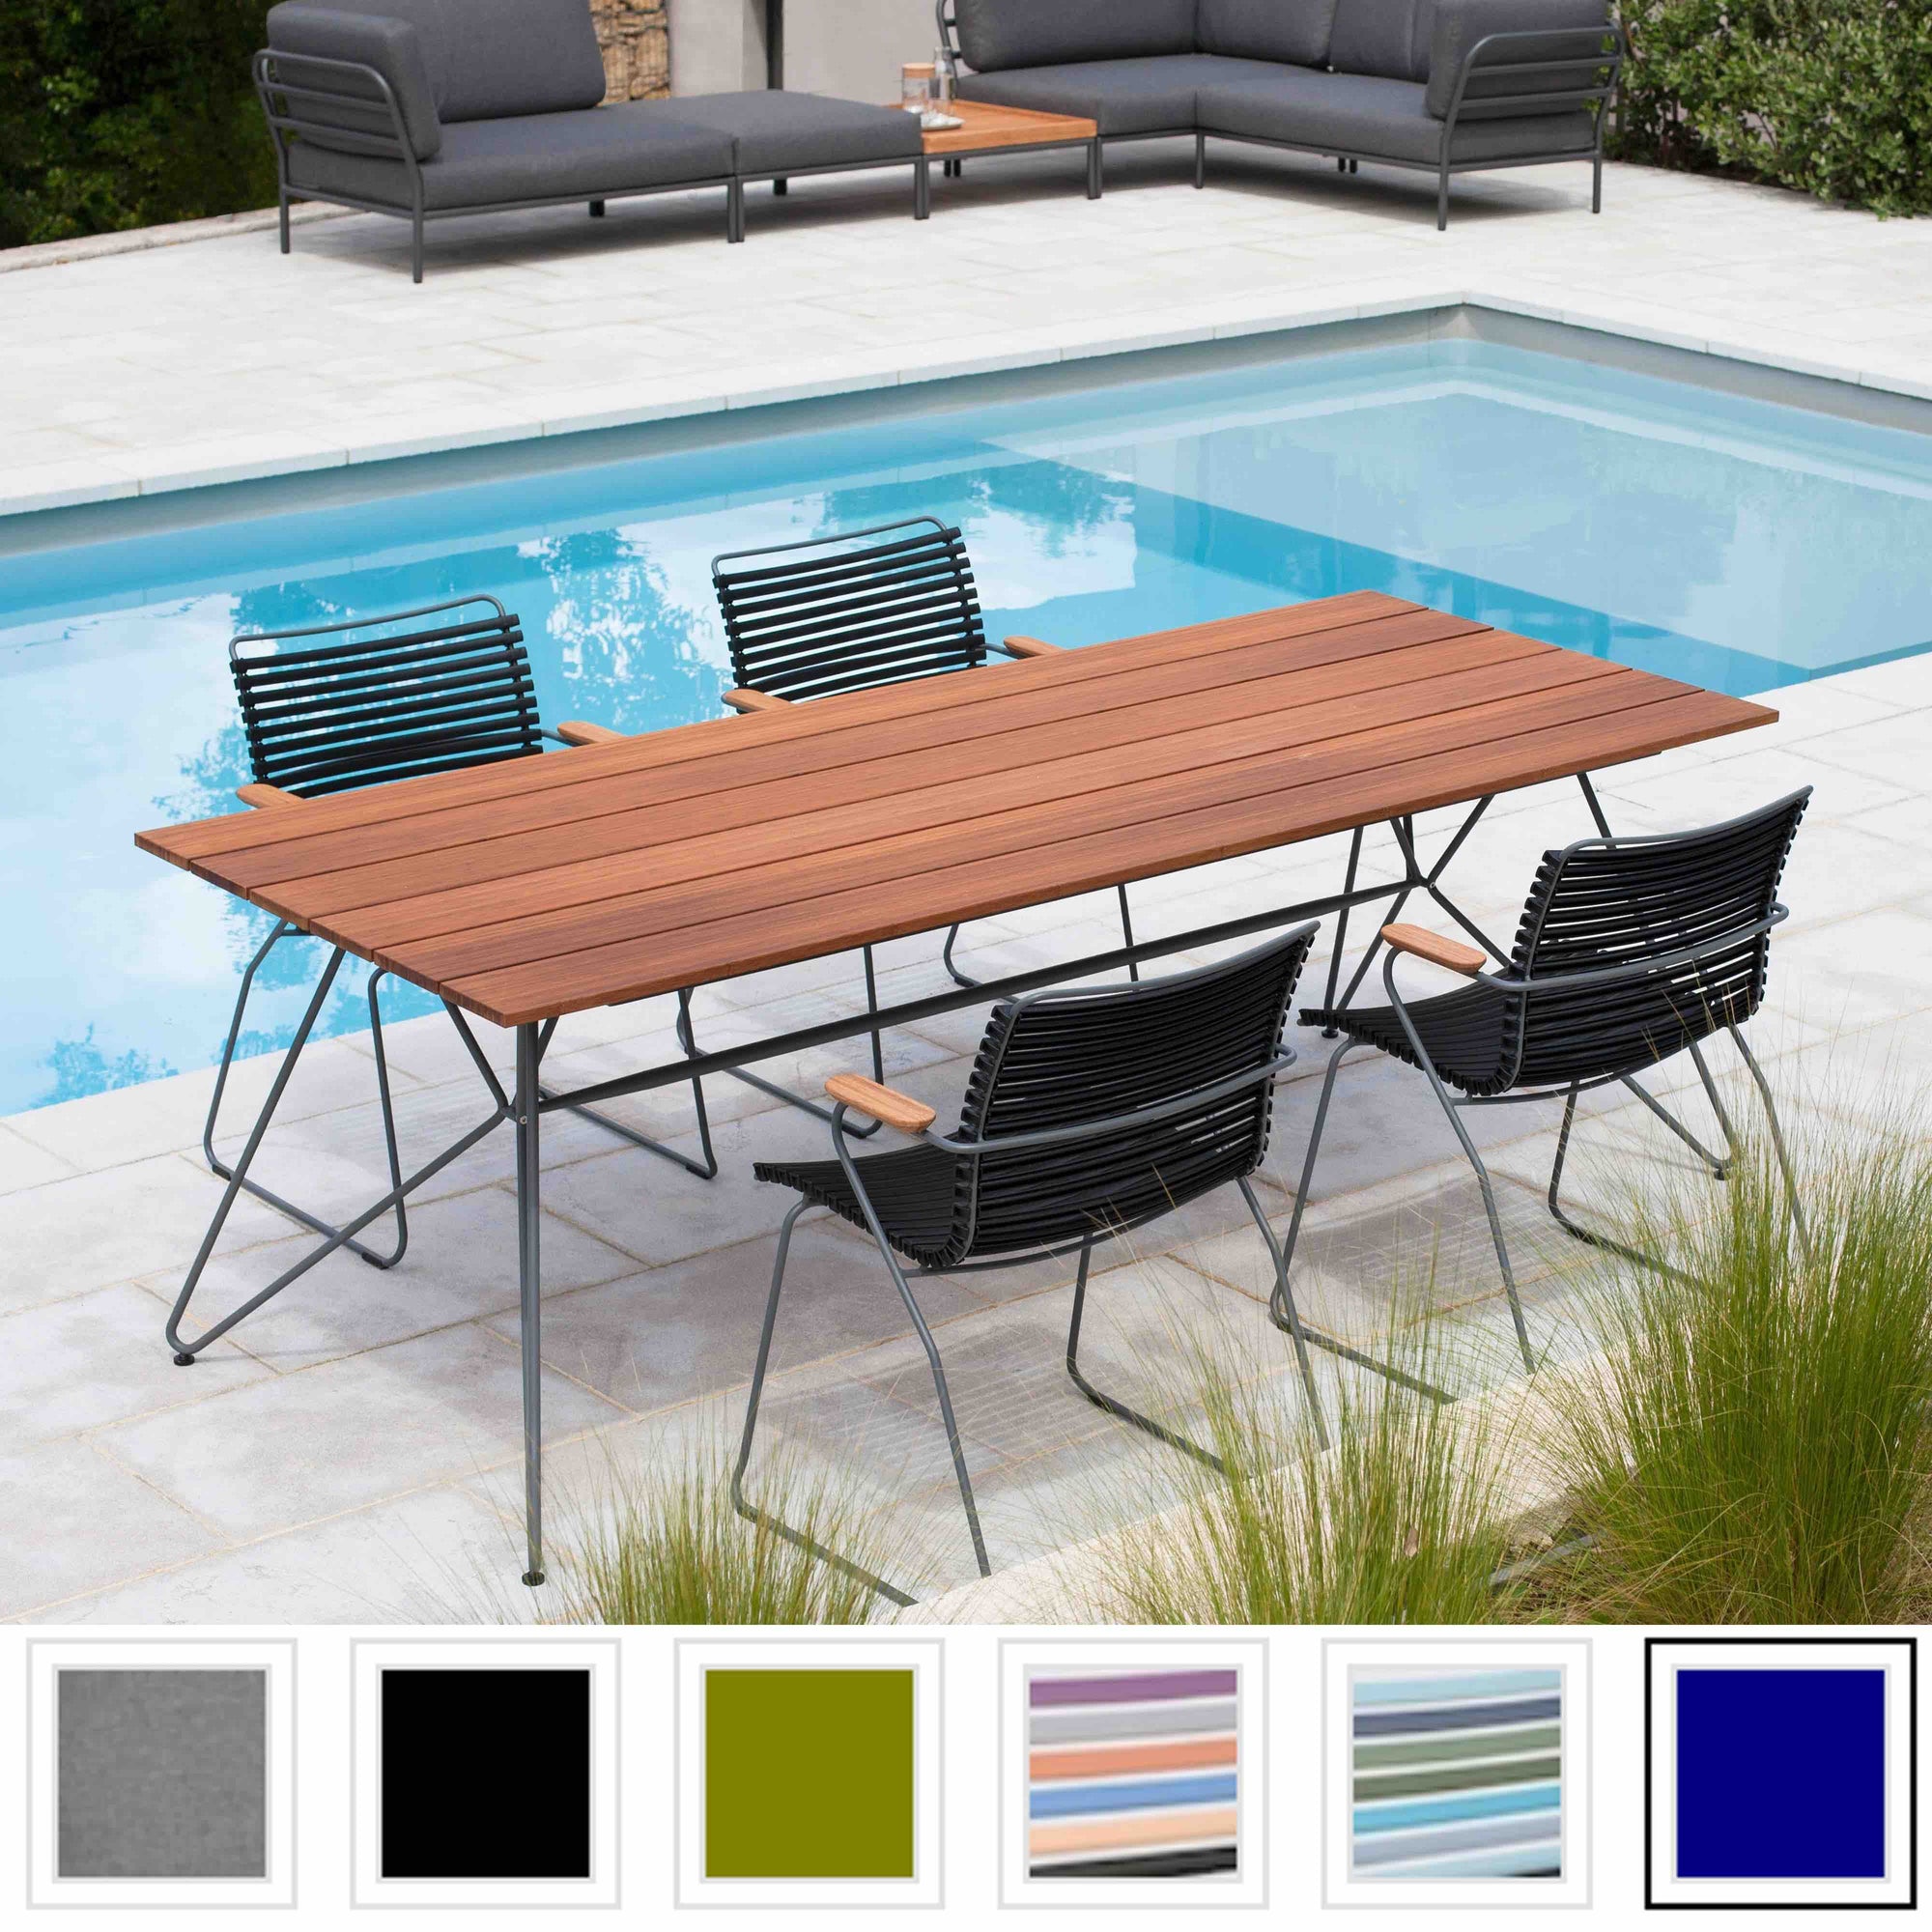 HOUE "Sketch" 86" Outdoor Dining Table